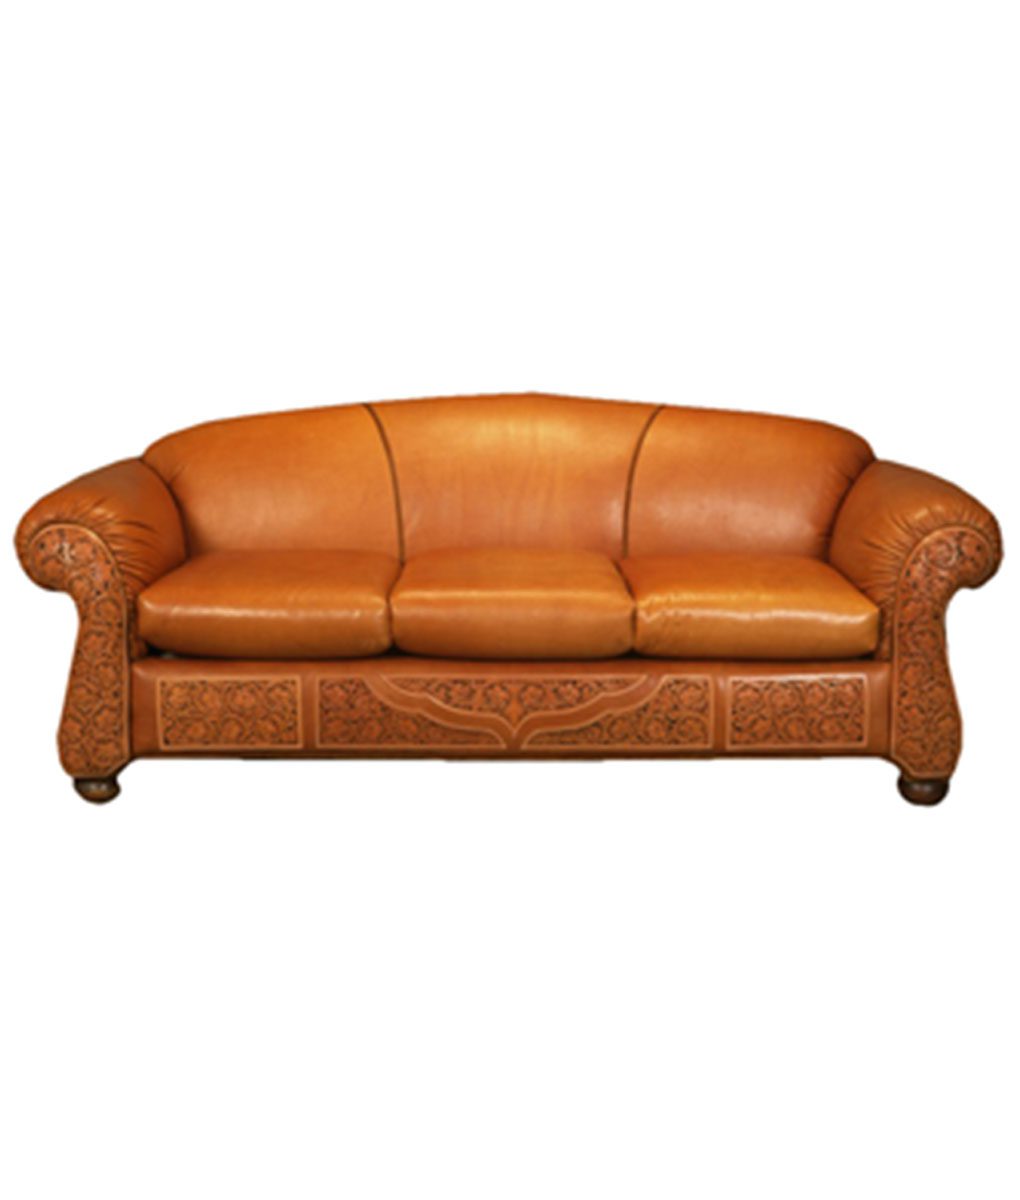 Tooled Leather Sofa Western, Rustic Leather Couches